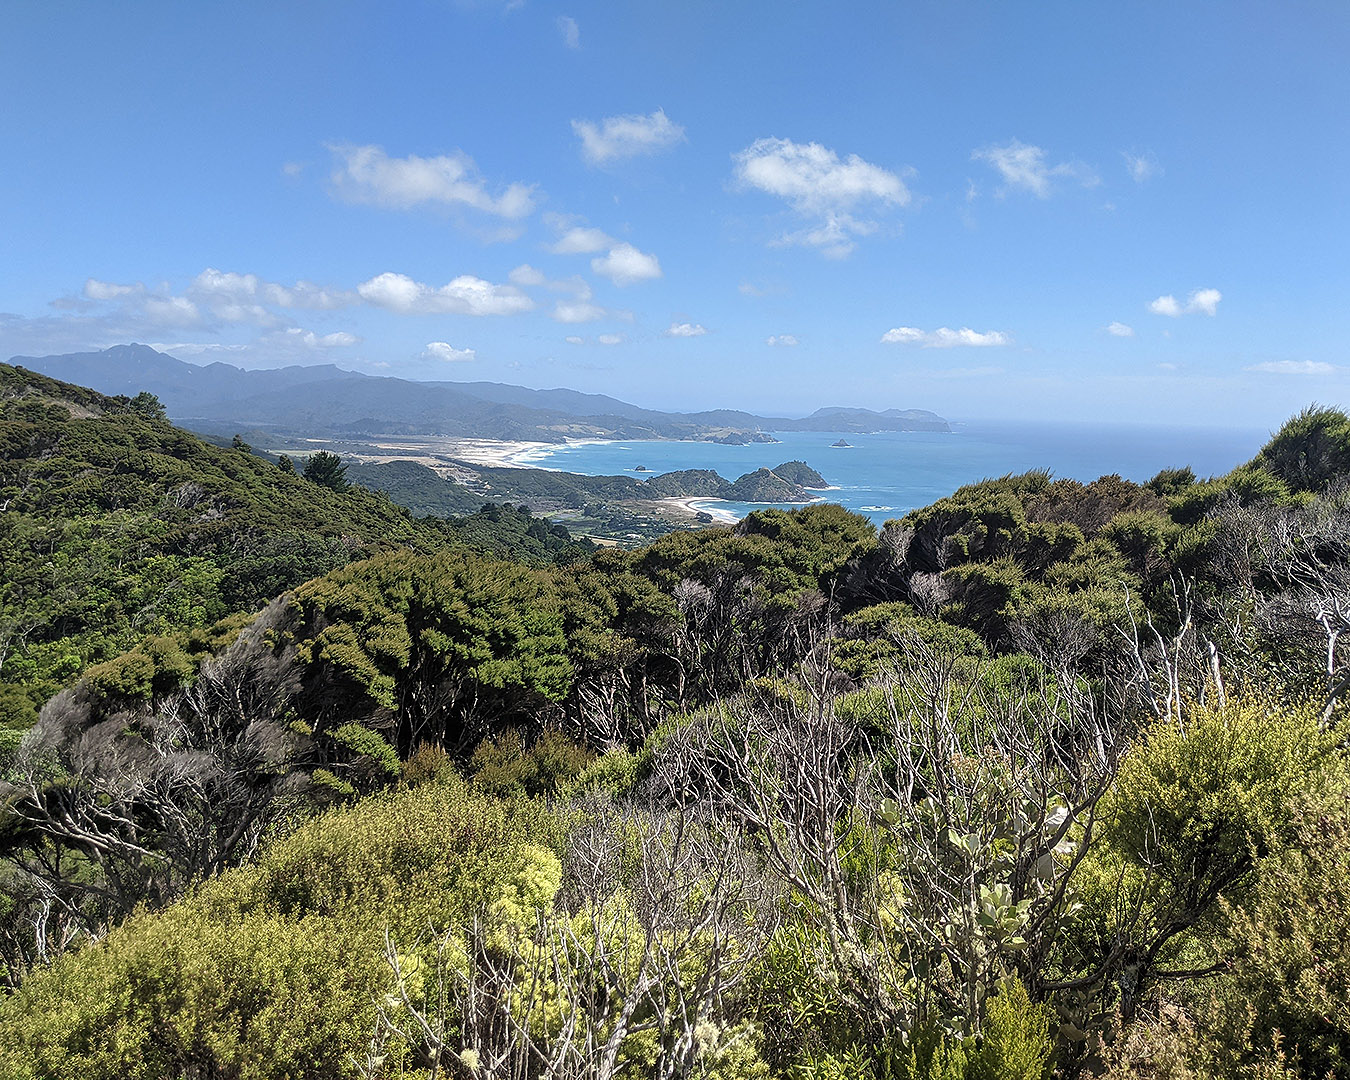 The view from the top of Station Rock Road Walkway looking towards Medland beach.